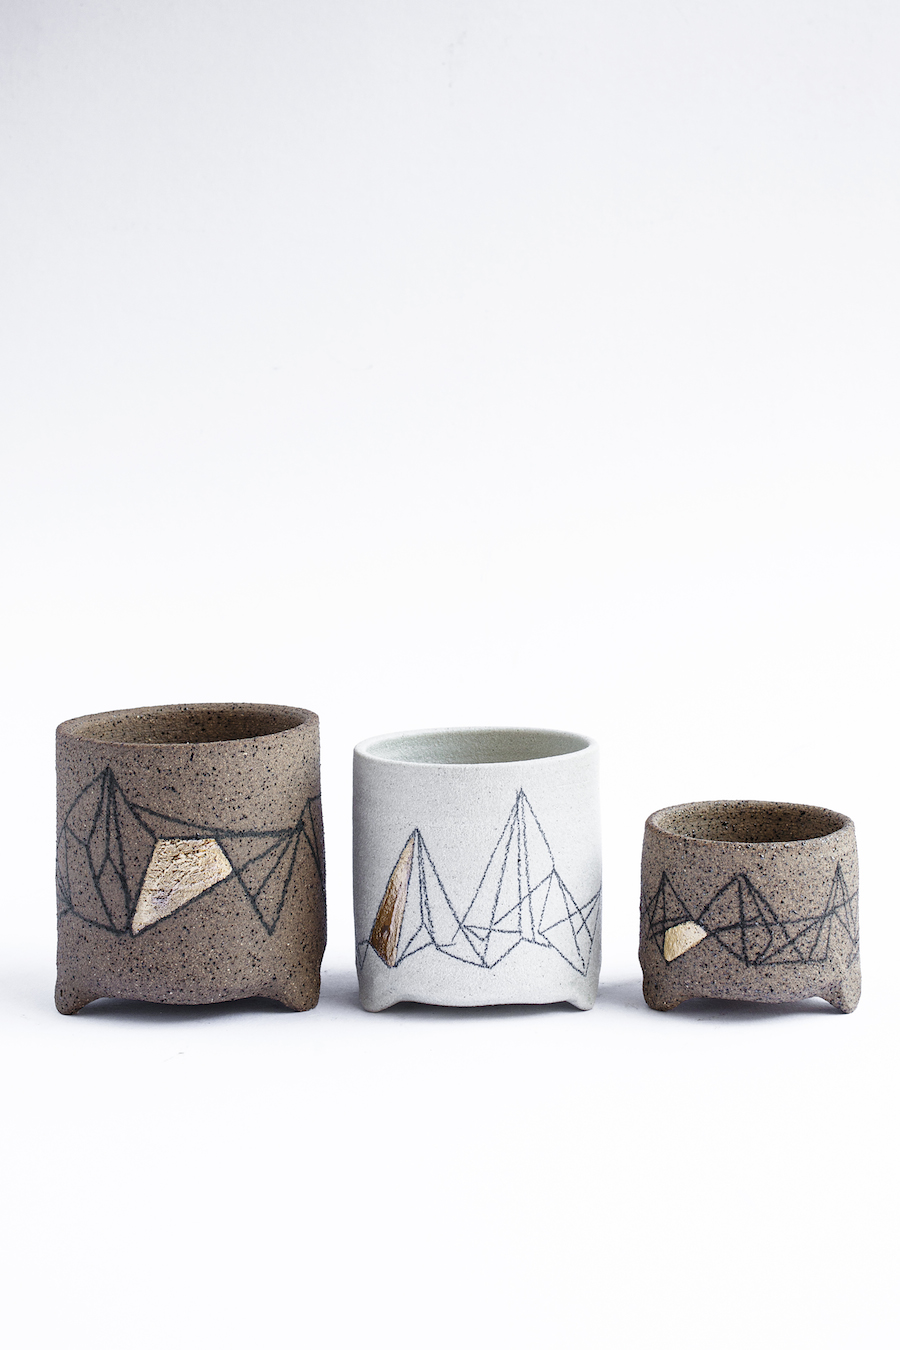 Ceramic vessels with gold